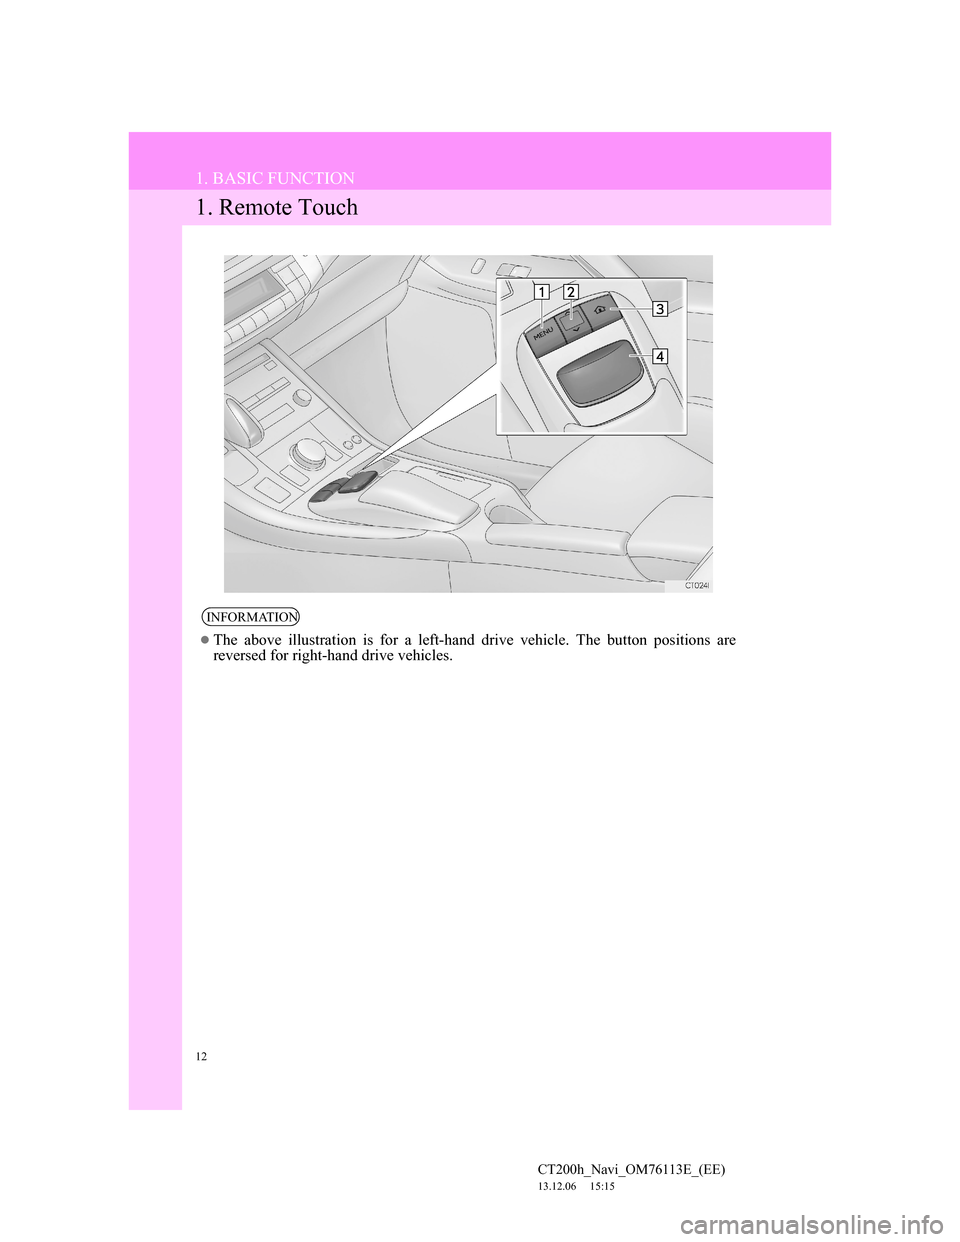 Lexus CT200h 2013  Navigation Manual (in English) 12
CT200h_Navi_OM76113E_(EE)
13.12.06     15:15
1. BASIC FUNCTION
1. Remote Touch
INFORMATION
The above illustration is for a left-hand drive vehicle. The button positions are
reversed for right-ha